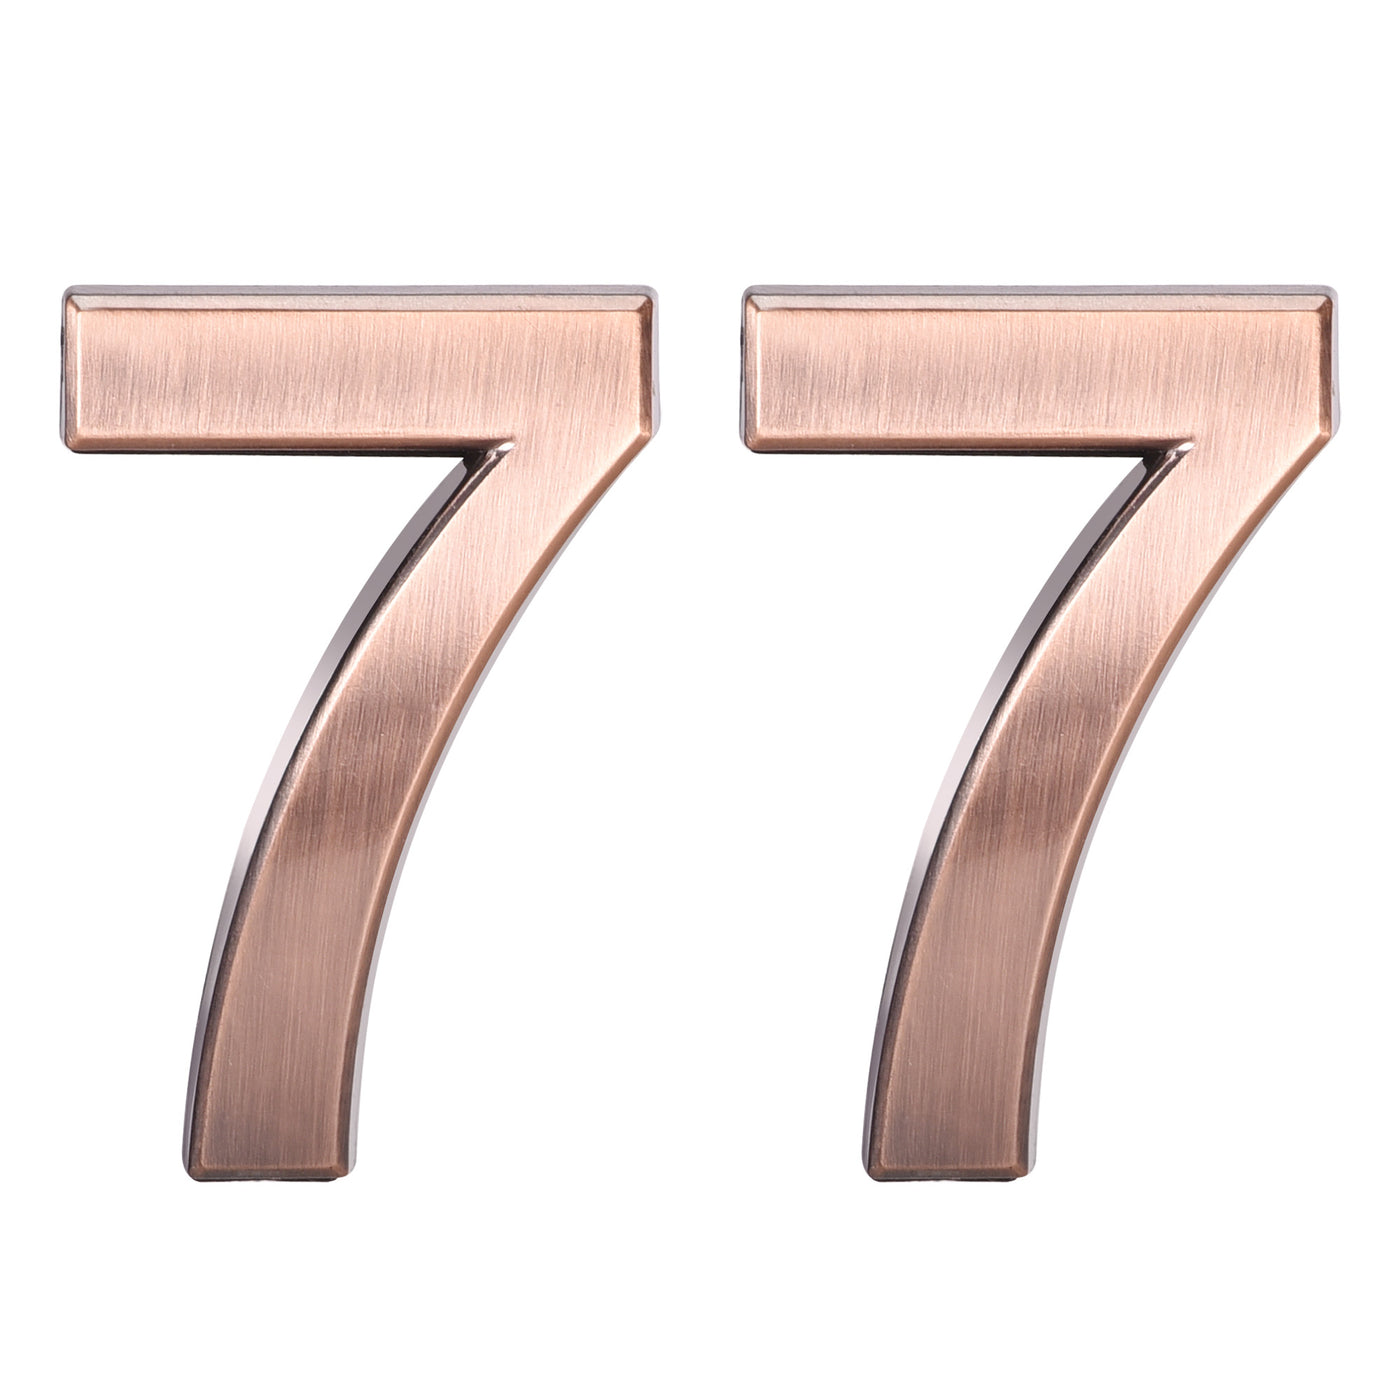 Uxcell Uxcell Self Adhesive House Number, 3.94 Inch ABS Plastic Number 1 for House Hotel Mailbox Address Sign Bronze Brushed 2 Pcs